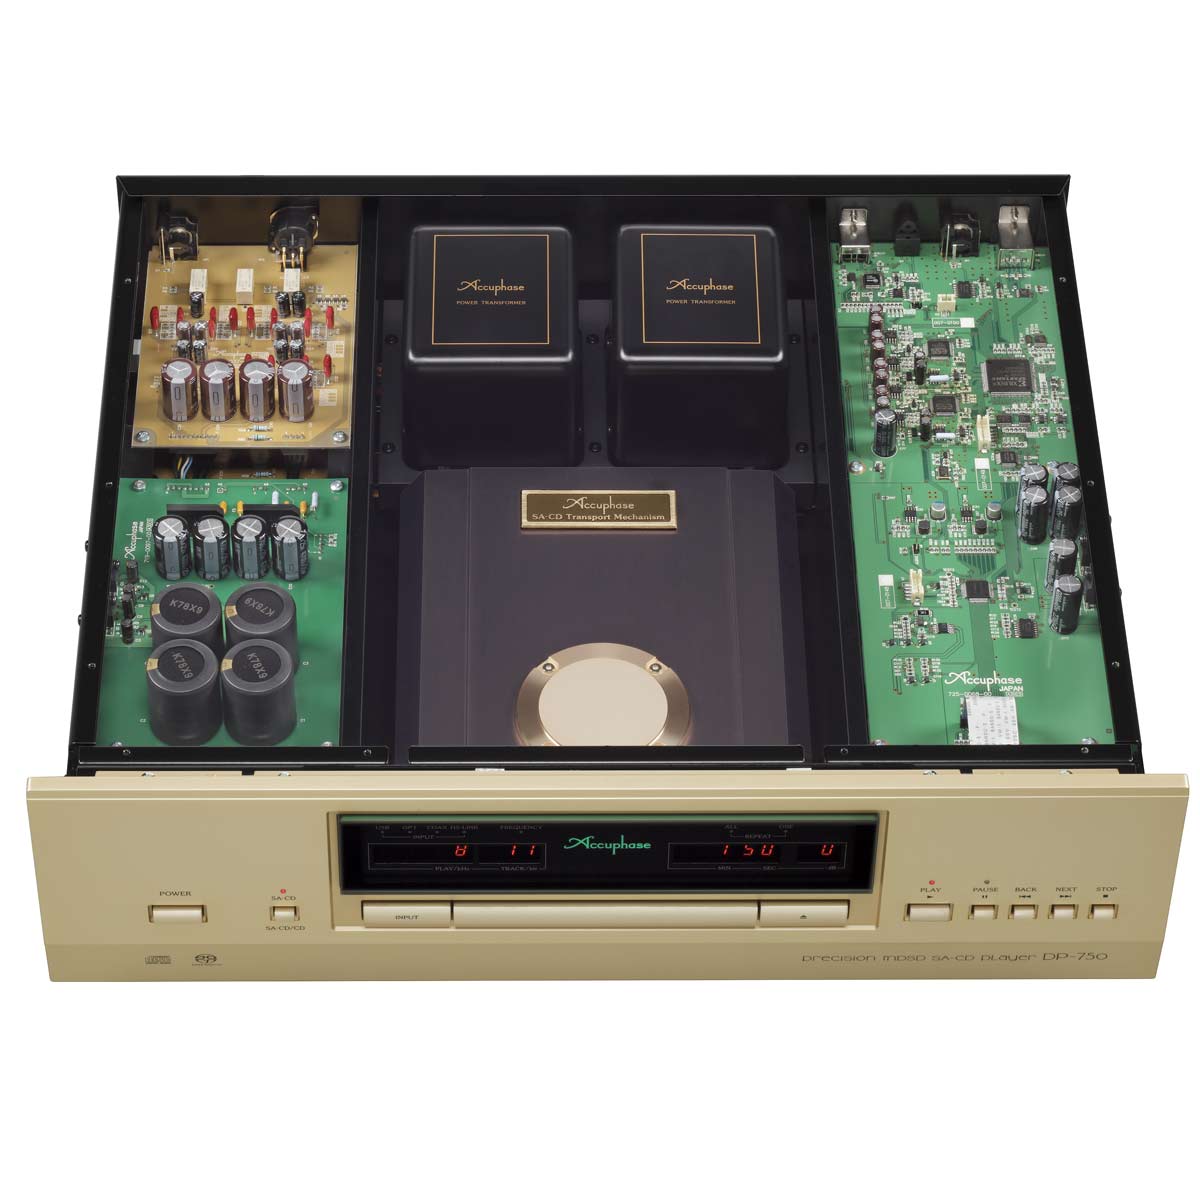 Accuphase DP-750 SACD / CD Player